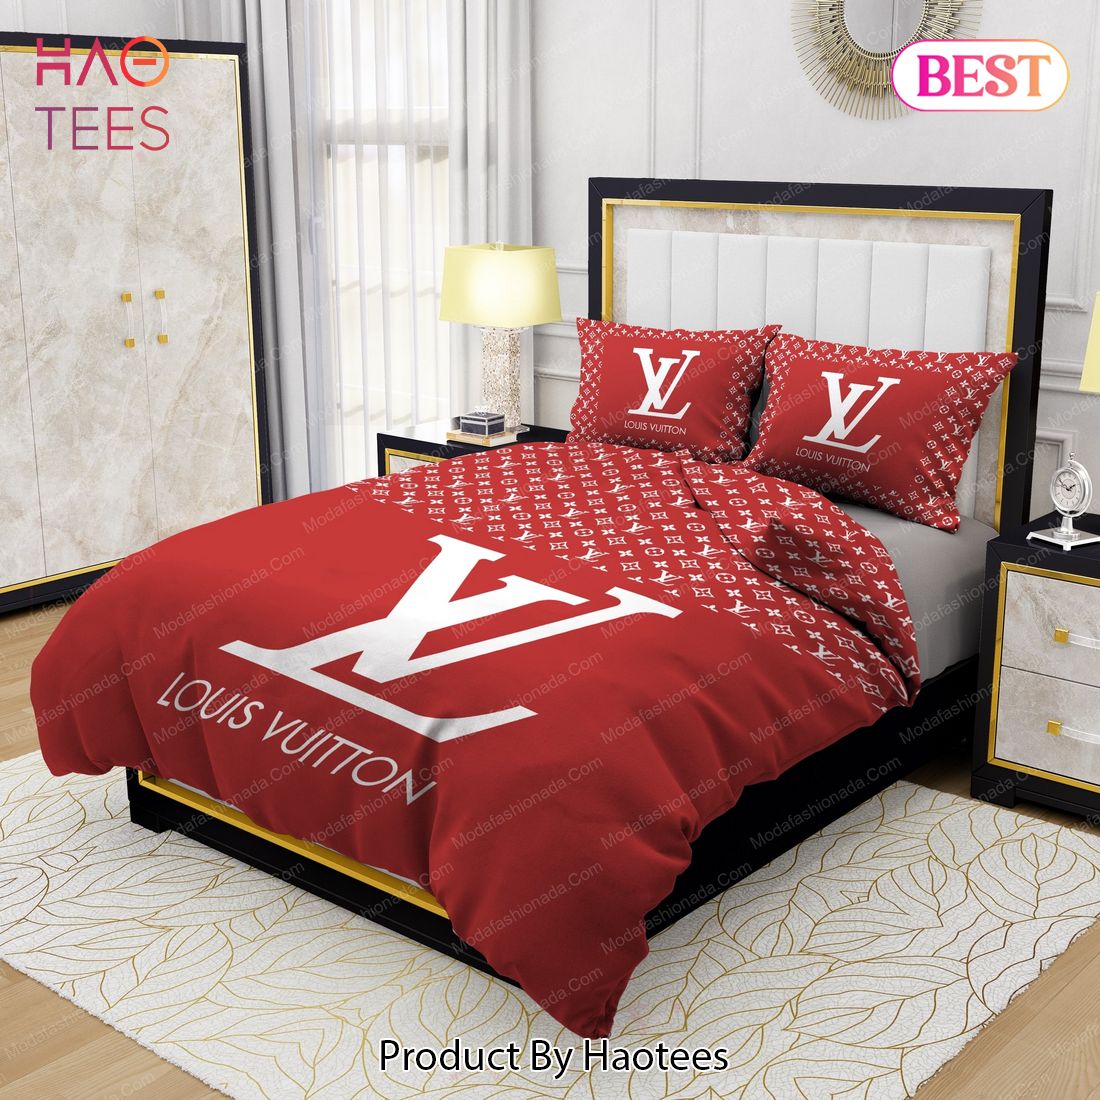 Best selling products louis vuitton and supreme monogram bedding set